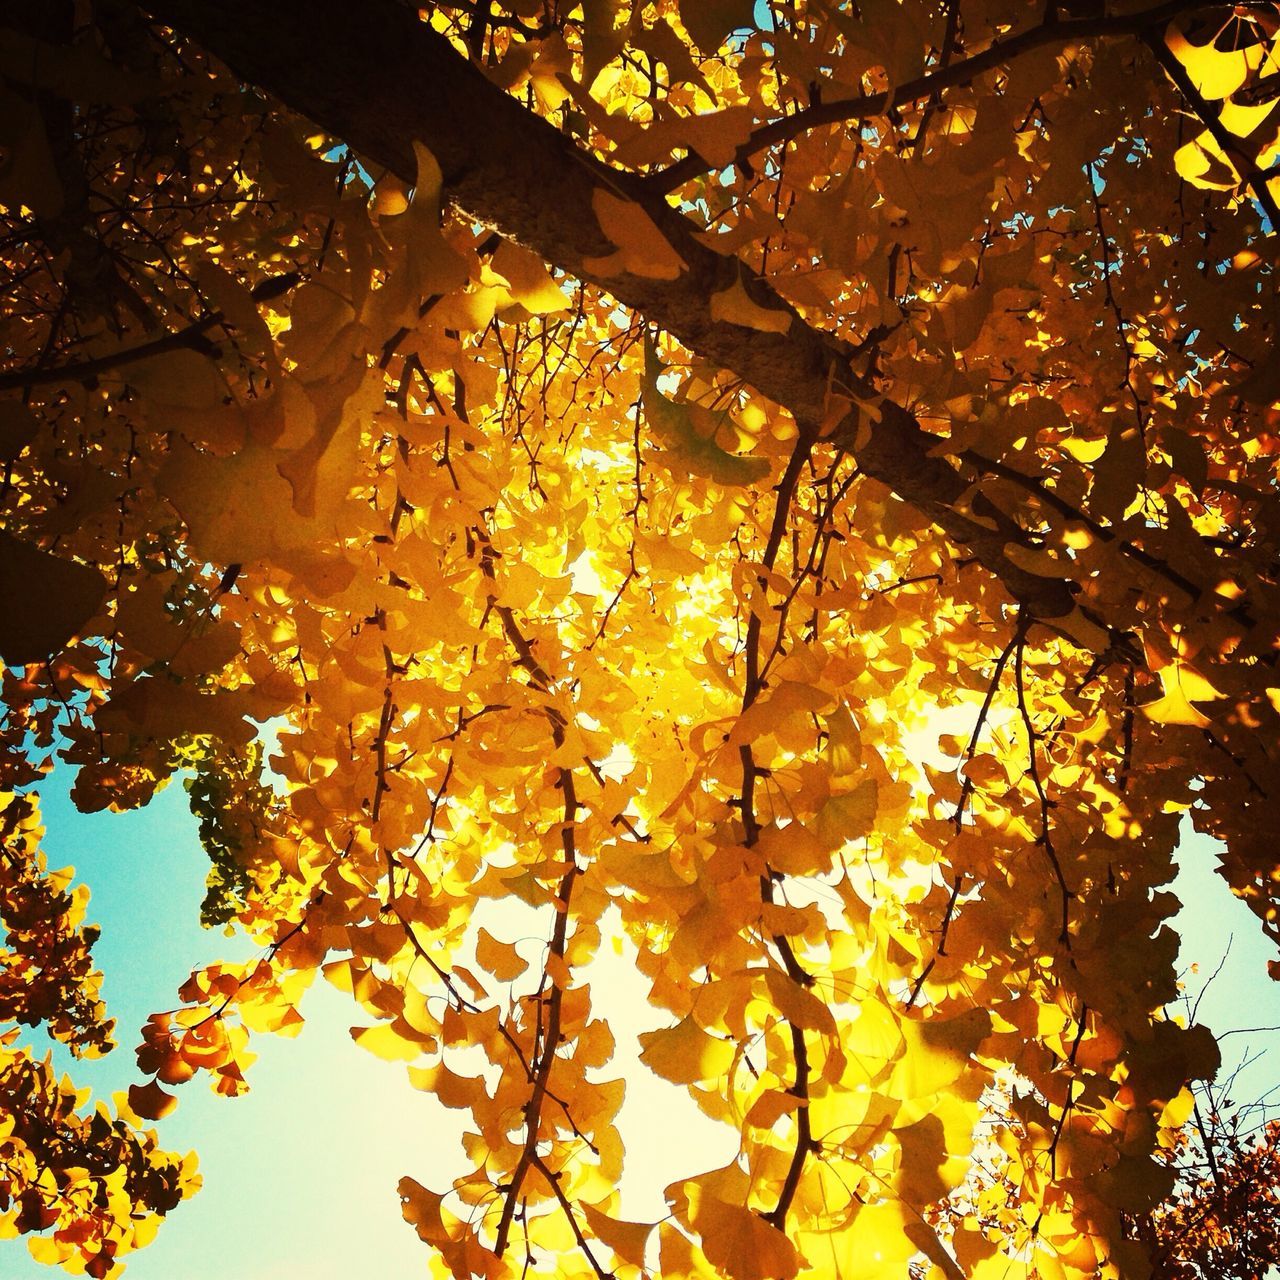 tree, branch, low angle view, autumn, leaf, change, growth, nature, yellow, season, beauty in nature, tranquility, sunlight, orange color, no people, outdoors, clear sky, sky, leaves, day